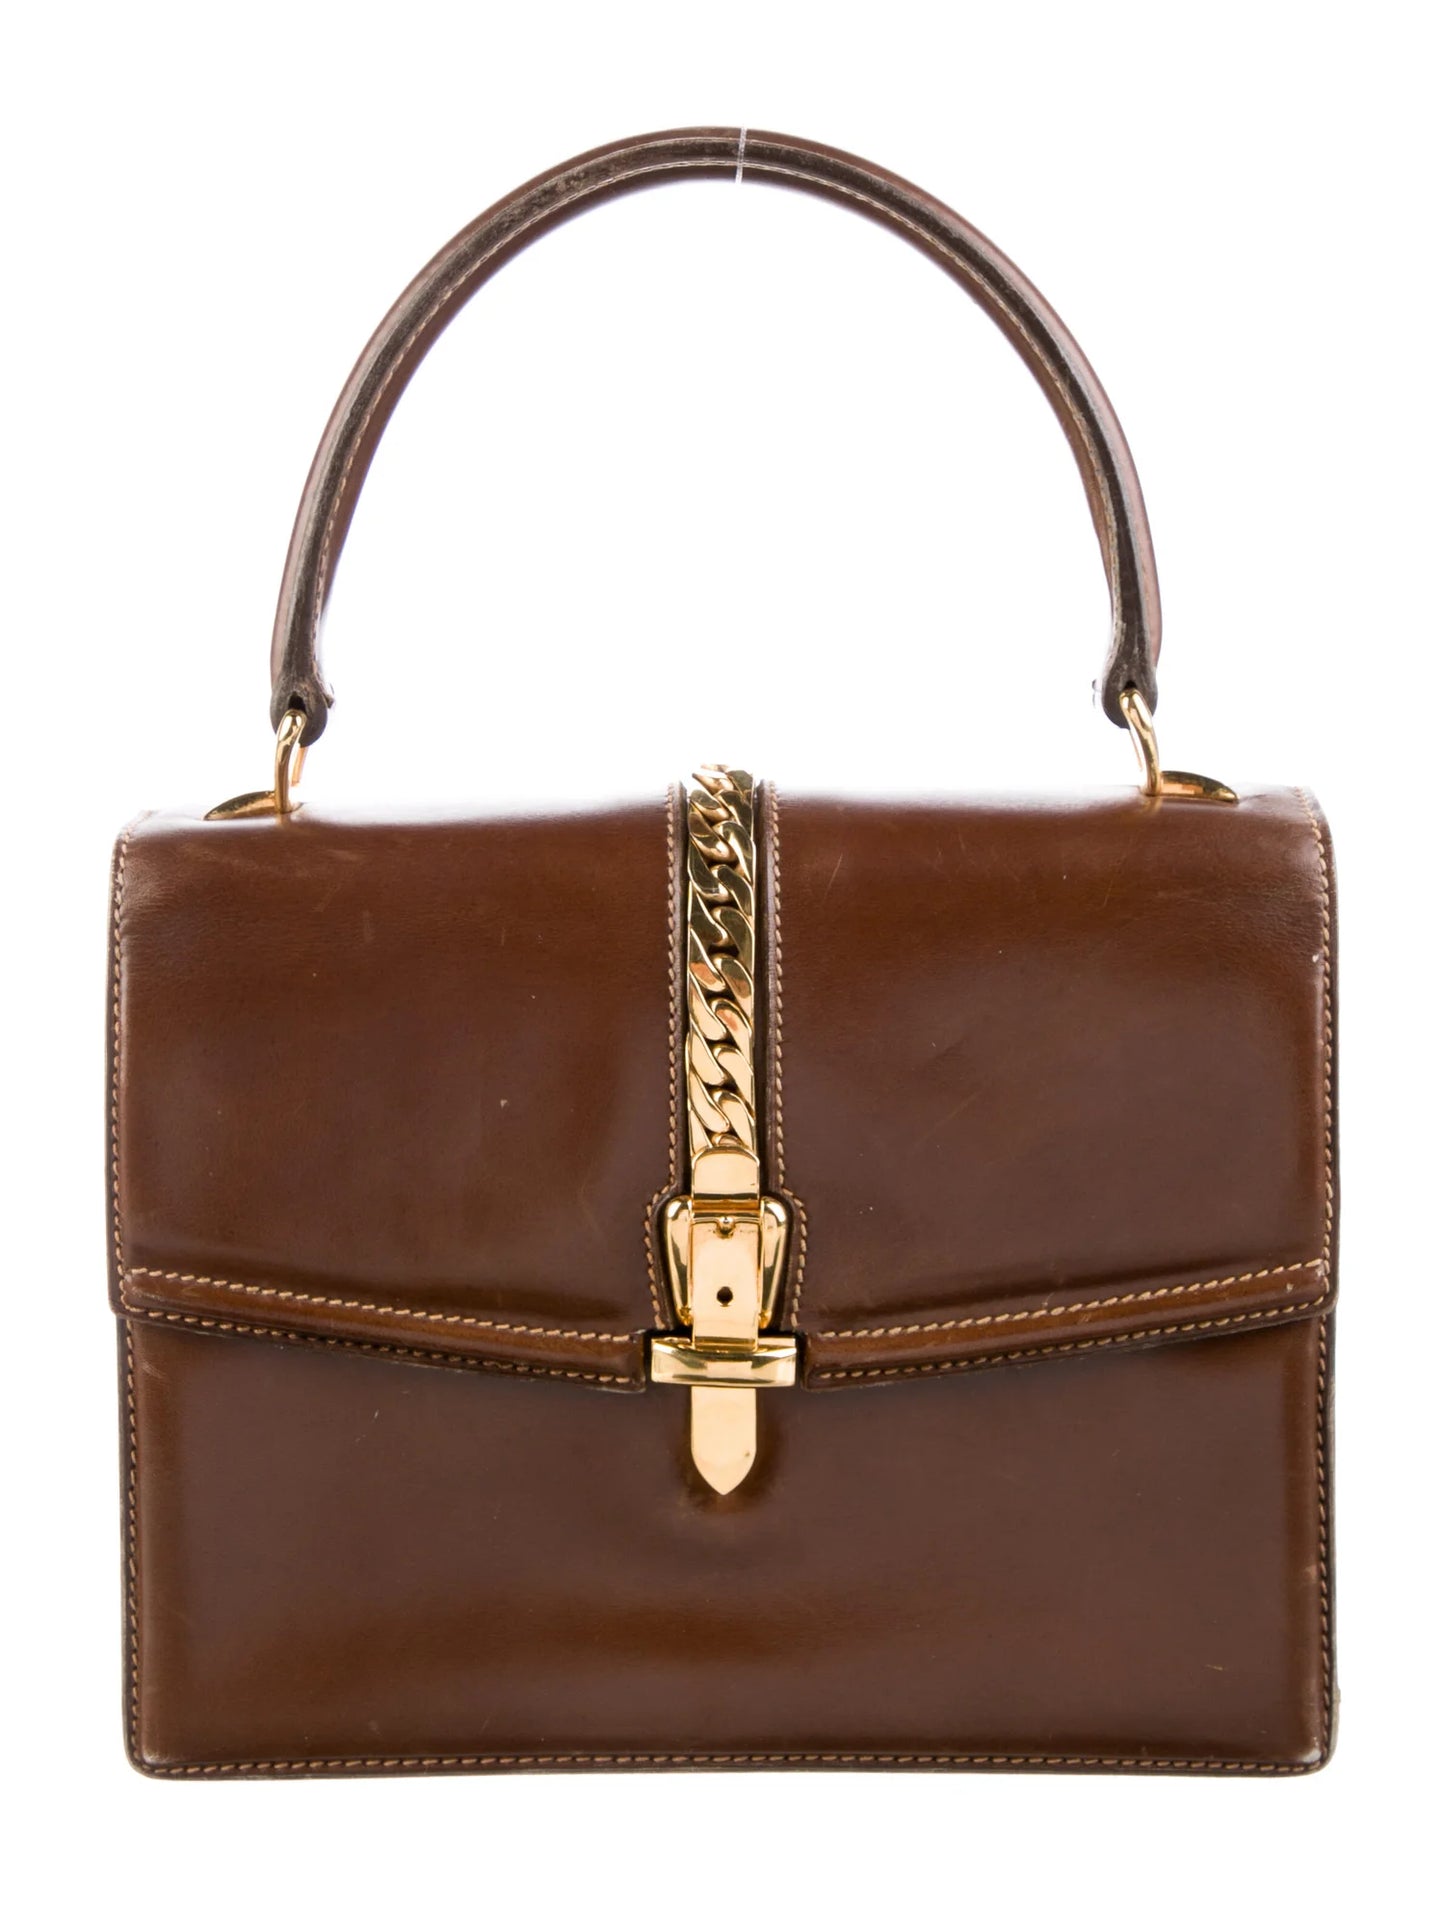 Gucci 1969 Sylvie chestnut brown leather top handle Kelly bag with a gold zipper accent